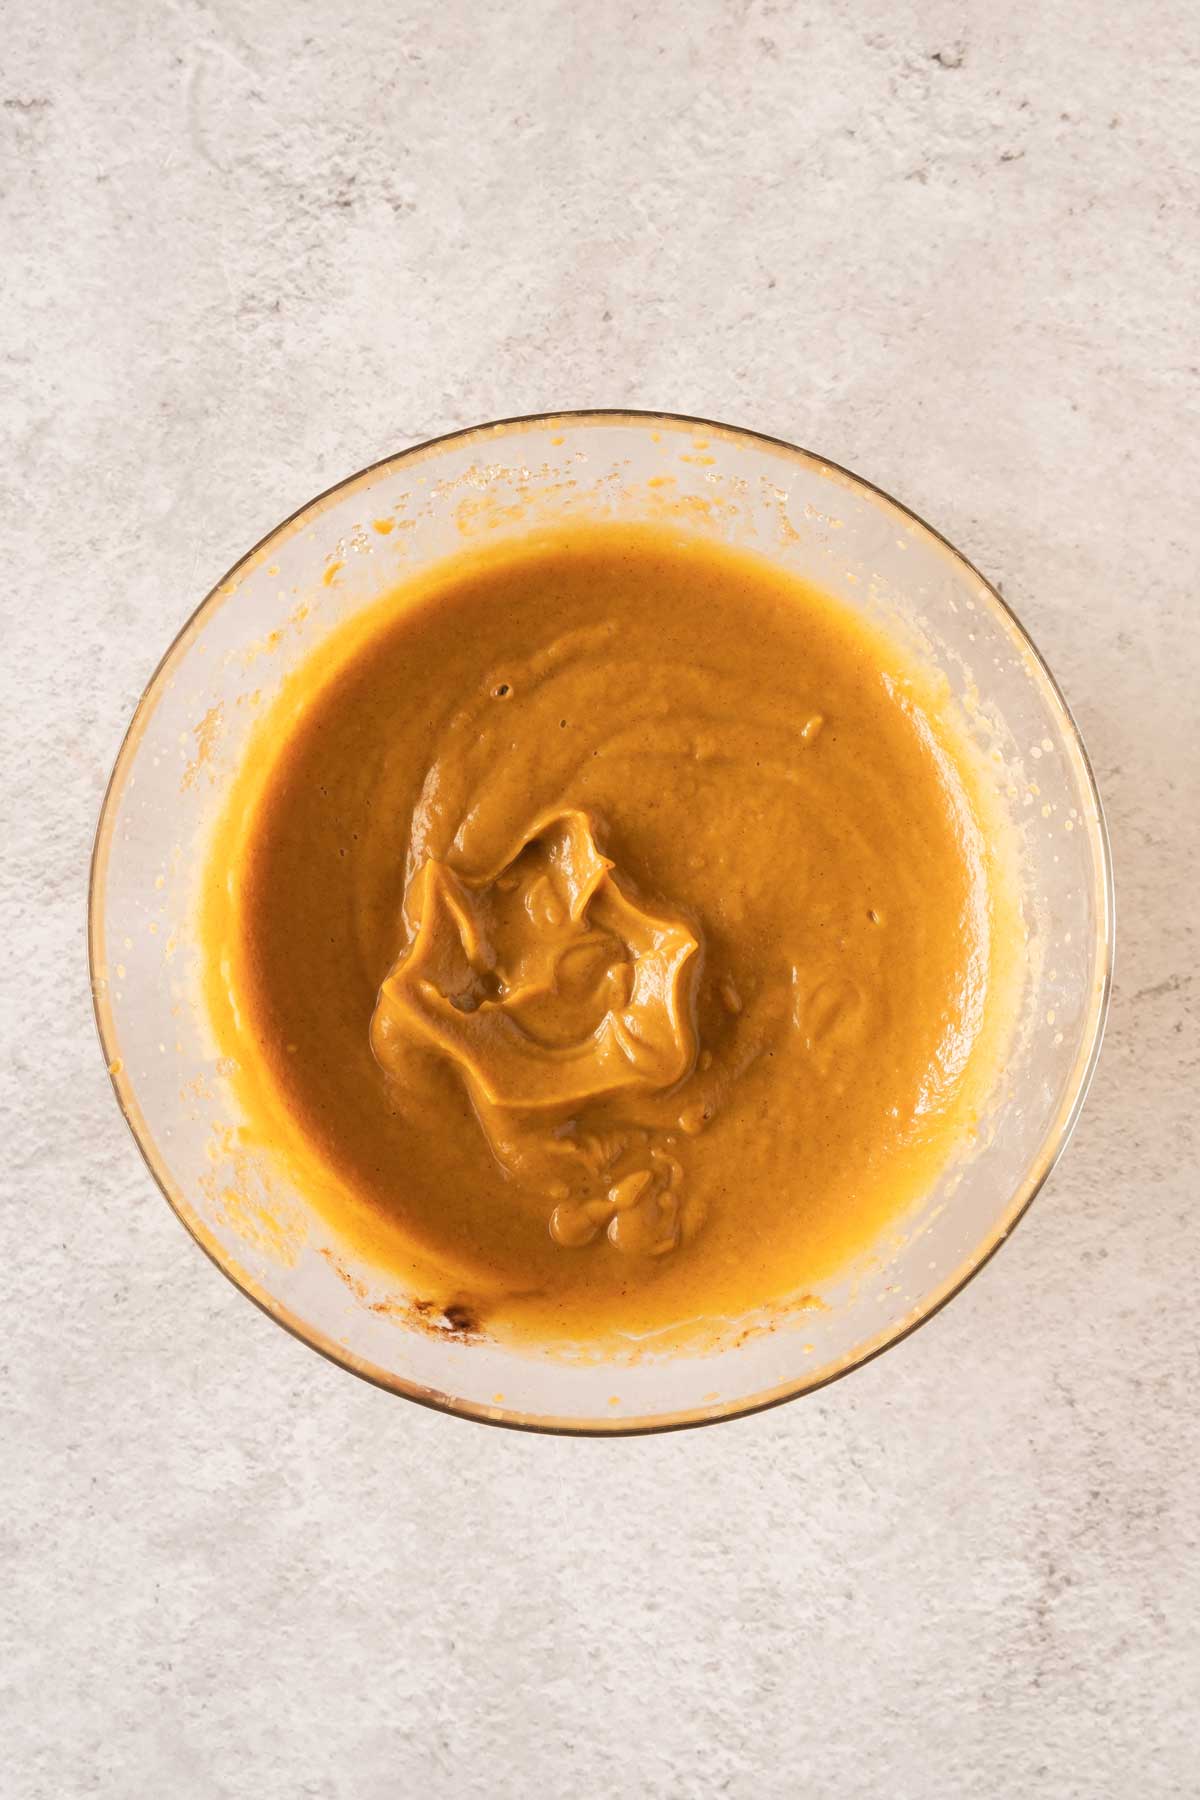 A bowl of pumpkin puree on a white surface.